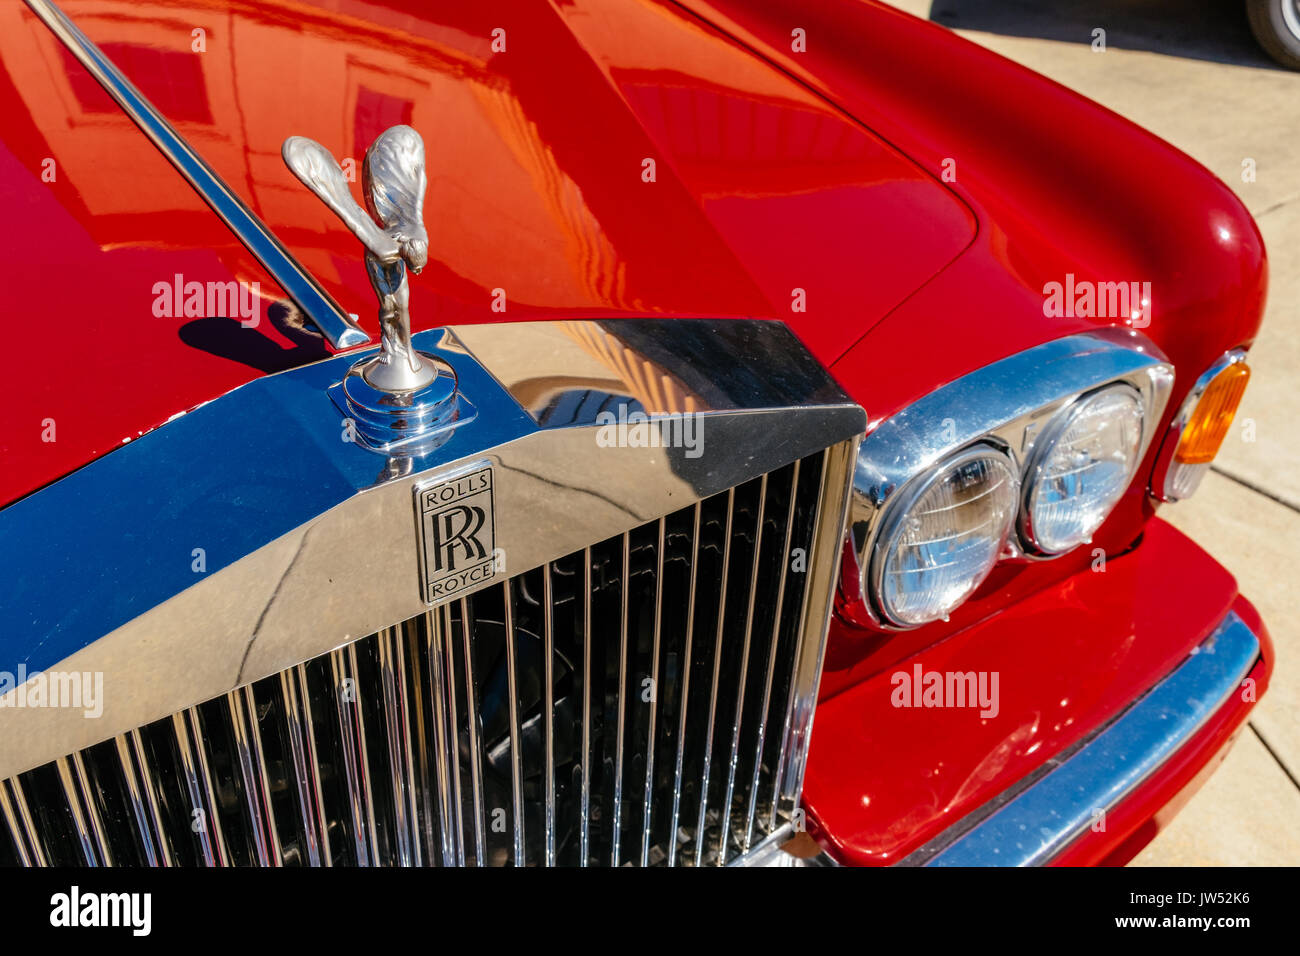 Front of Rolls Royce car showing the distinctive hood ornament, Spirit of Ecstasy. Stock Photo